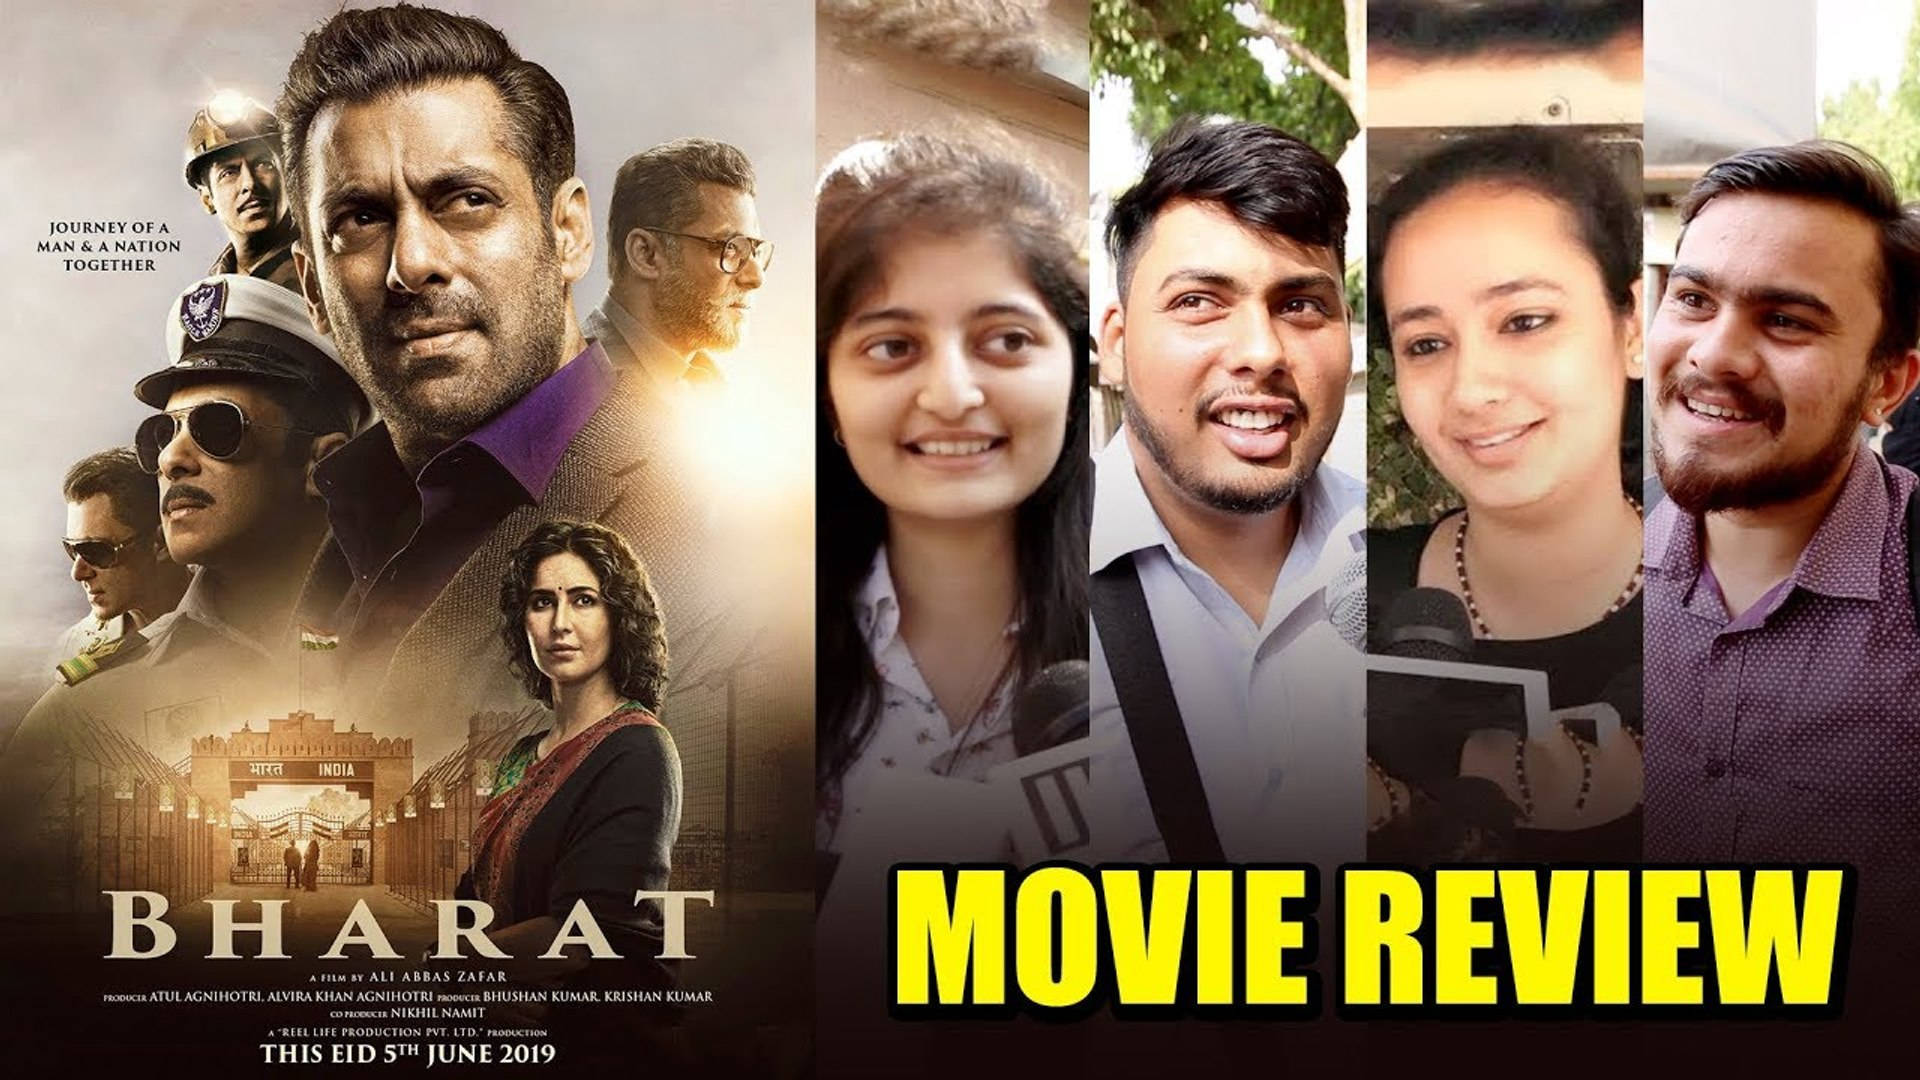 People's Review On Film Bharat Wallpaper